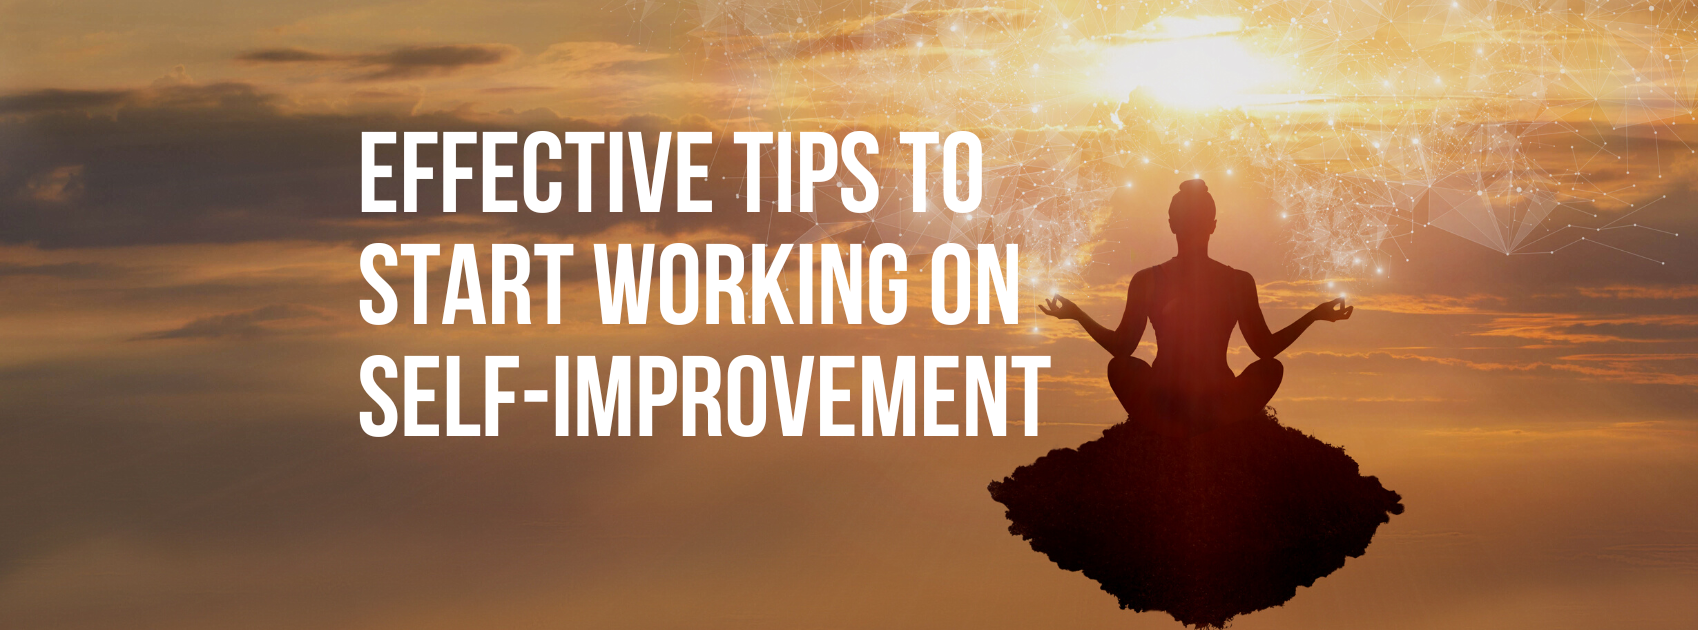 Effective Tips to Start Working on Self-Improvement